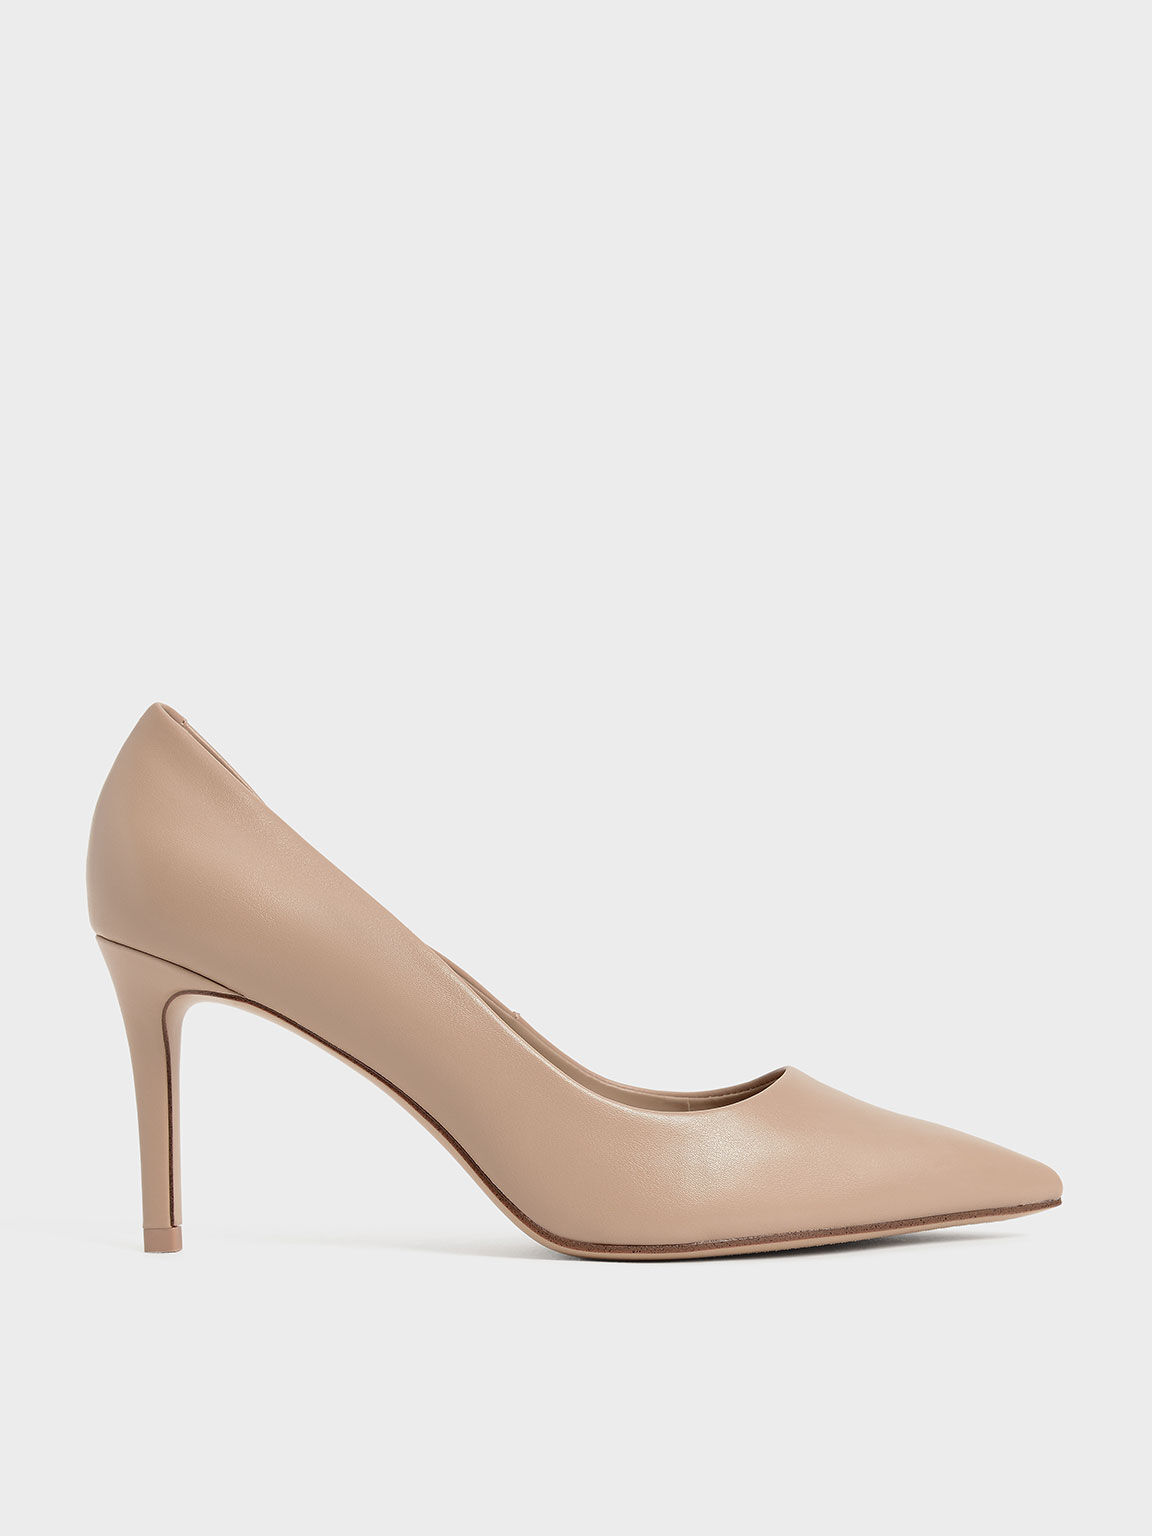 Click Your Heels Blush Pink Pointed Pumps | Heels, Pumps, Shoe boots